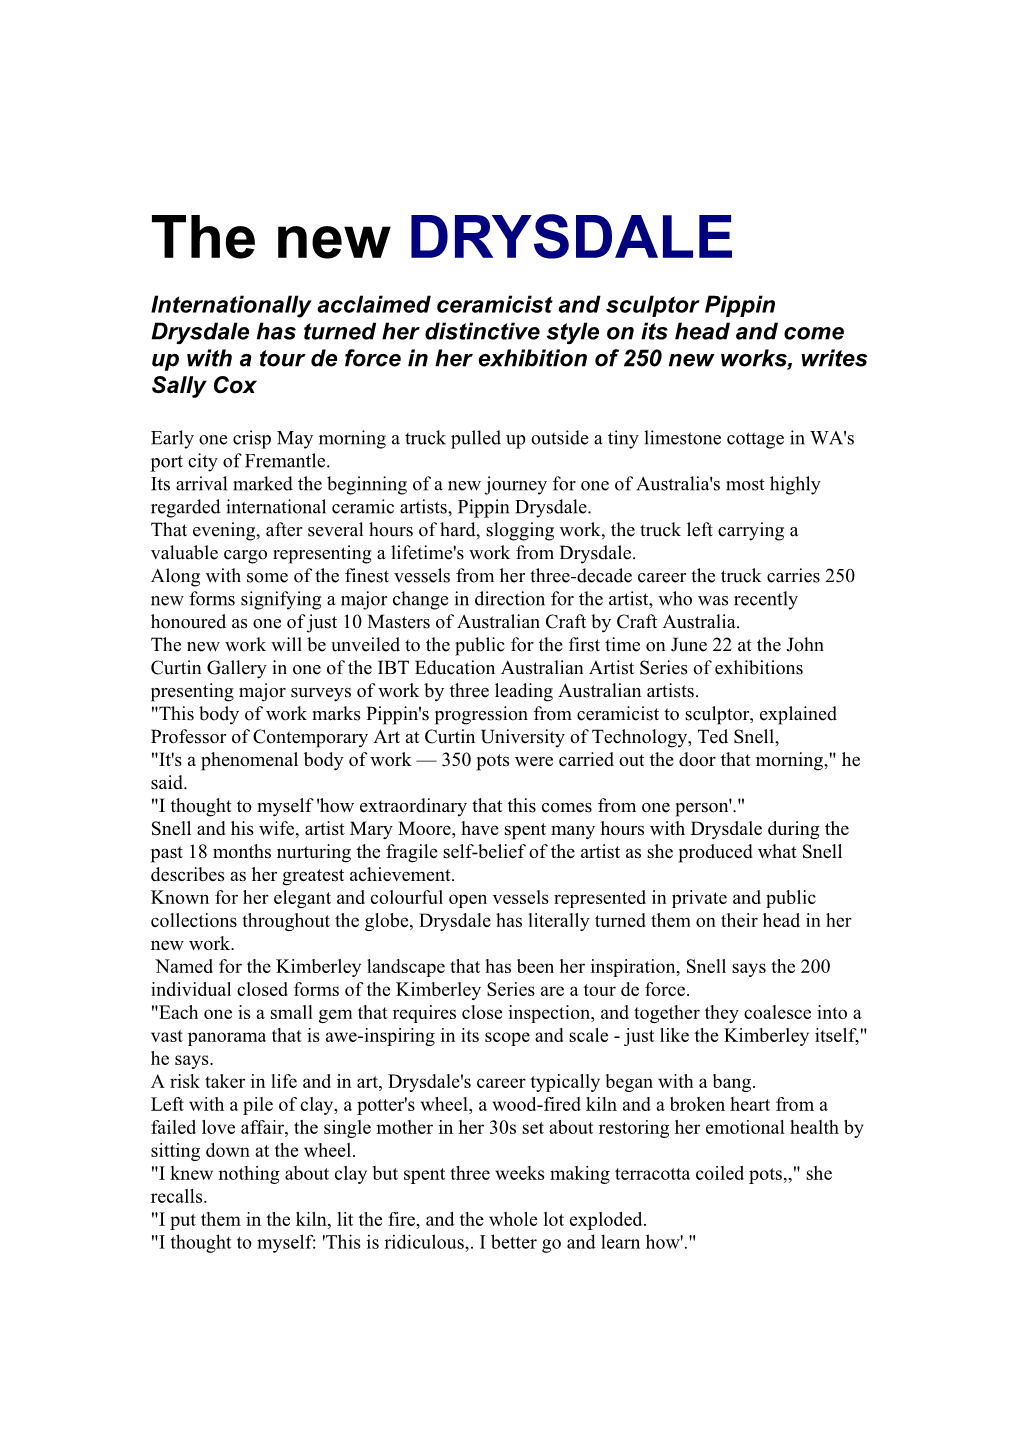 The New DRYSDALE